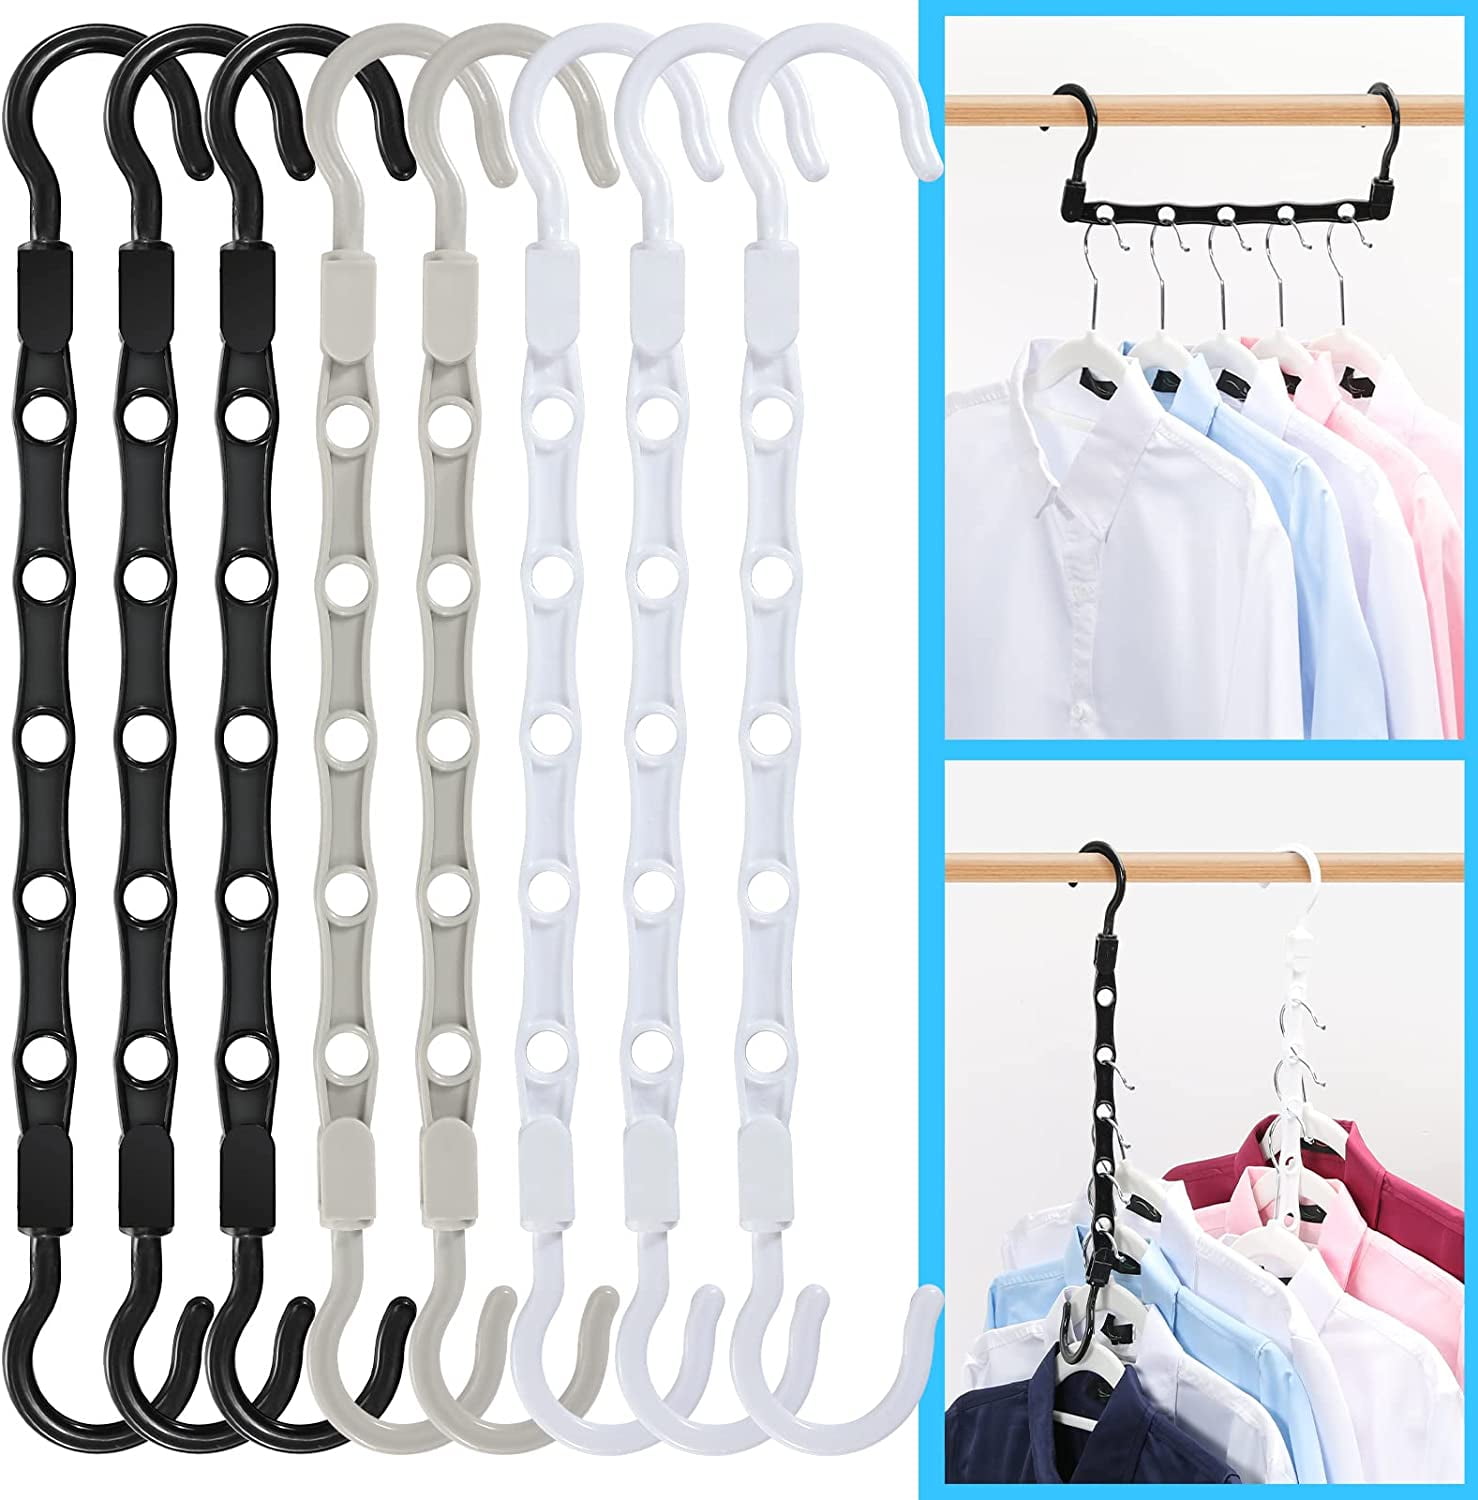 HOUSE DAY Sturdy Plastic Space Saving Hangers 12 Pack, Cascading Hangers  Organizer Closet Space Saver 80% and Wrinkle Free Clothes, Multi  Collapsible